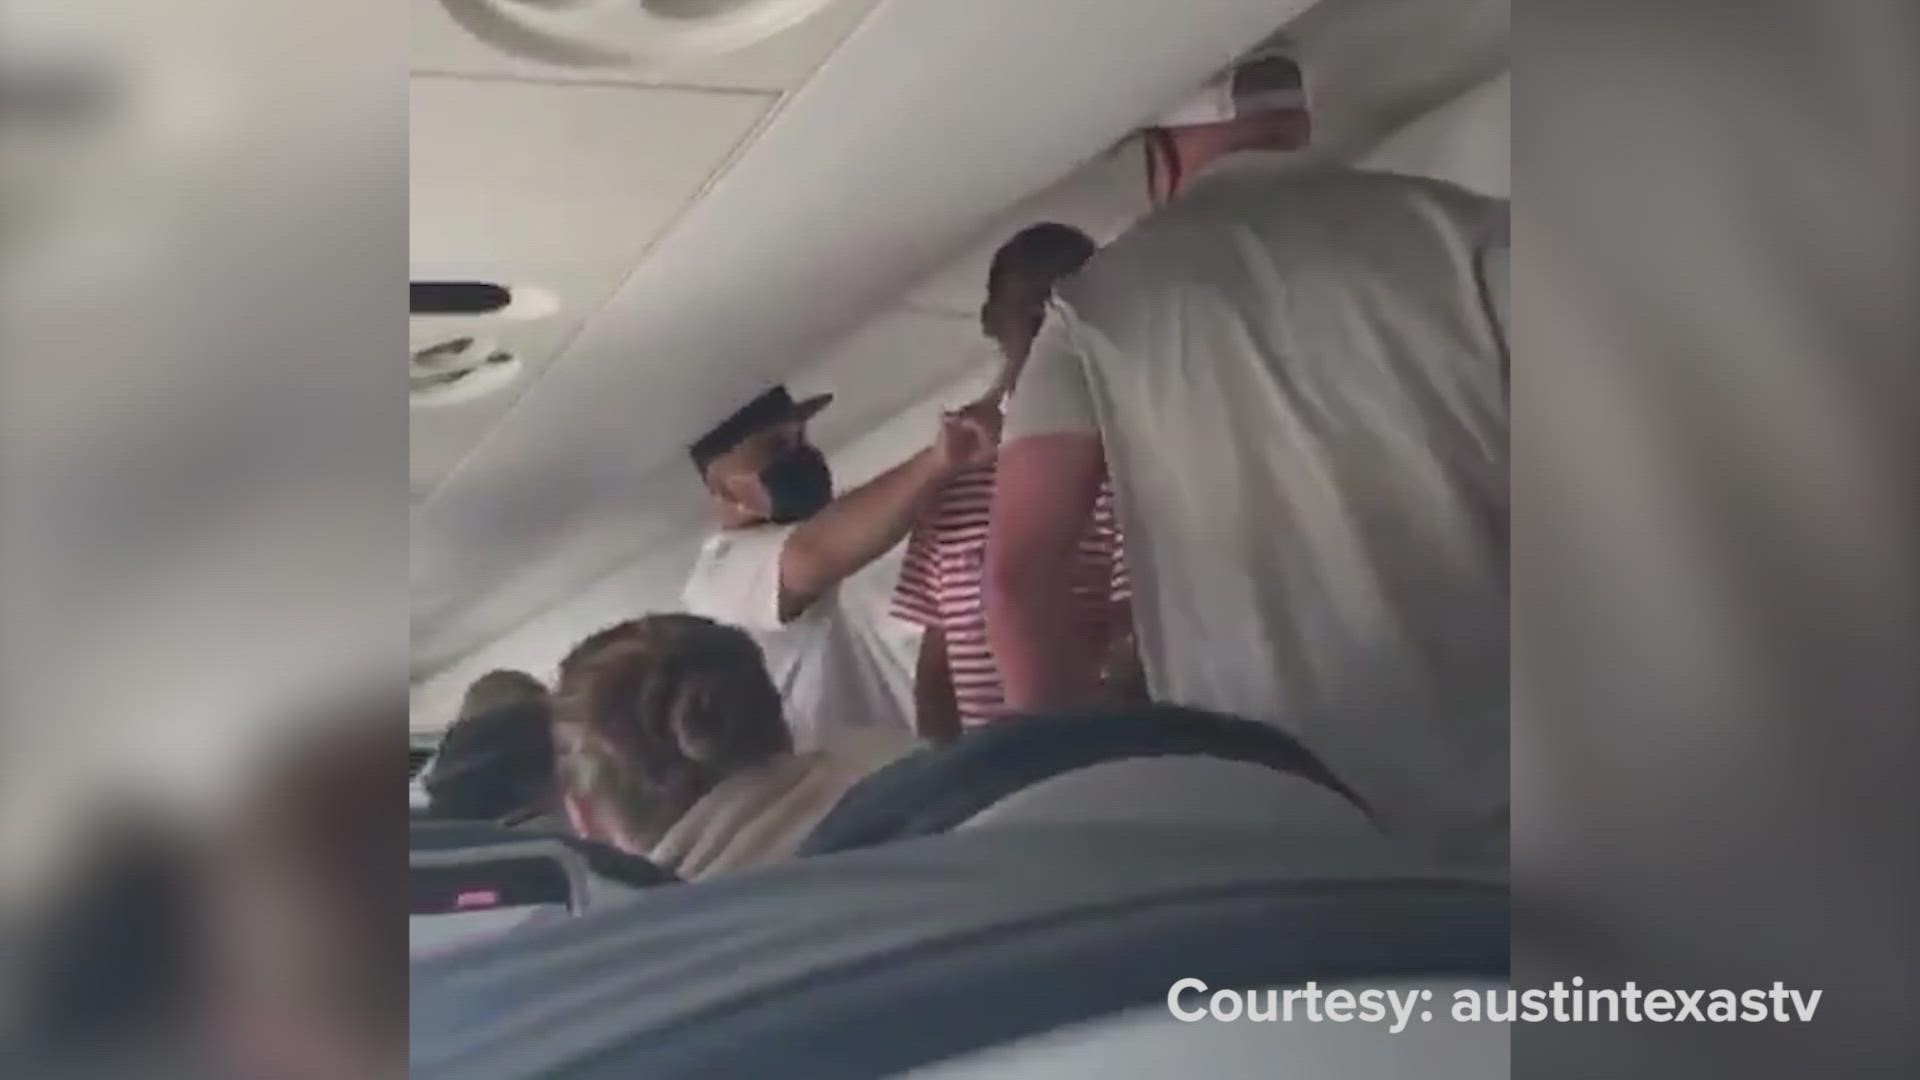 The fight reportedly broke out after a dispute over a reclined seat.